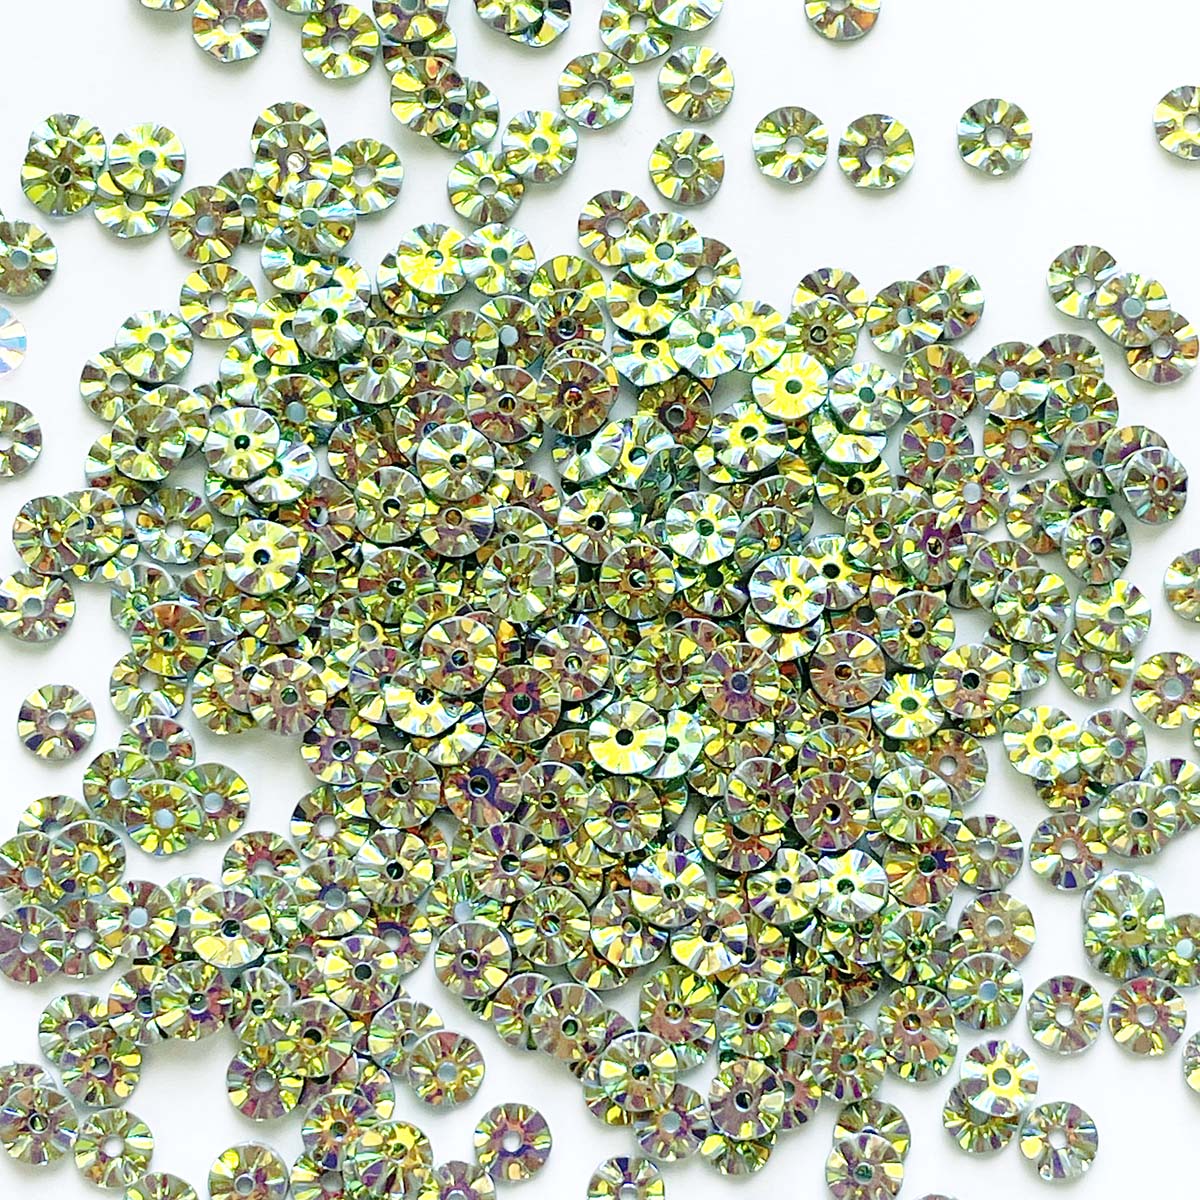 www.colourstreams.com.au  Colour Streams Sequins Embellishments Stitching Costumes Mardi Gras Dancing Ballet Theatre Shows Drag Queen Bling Australia USA NZ Canada Roundwheel Green with Multi Lights Lights 5mm S185